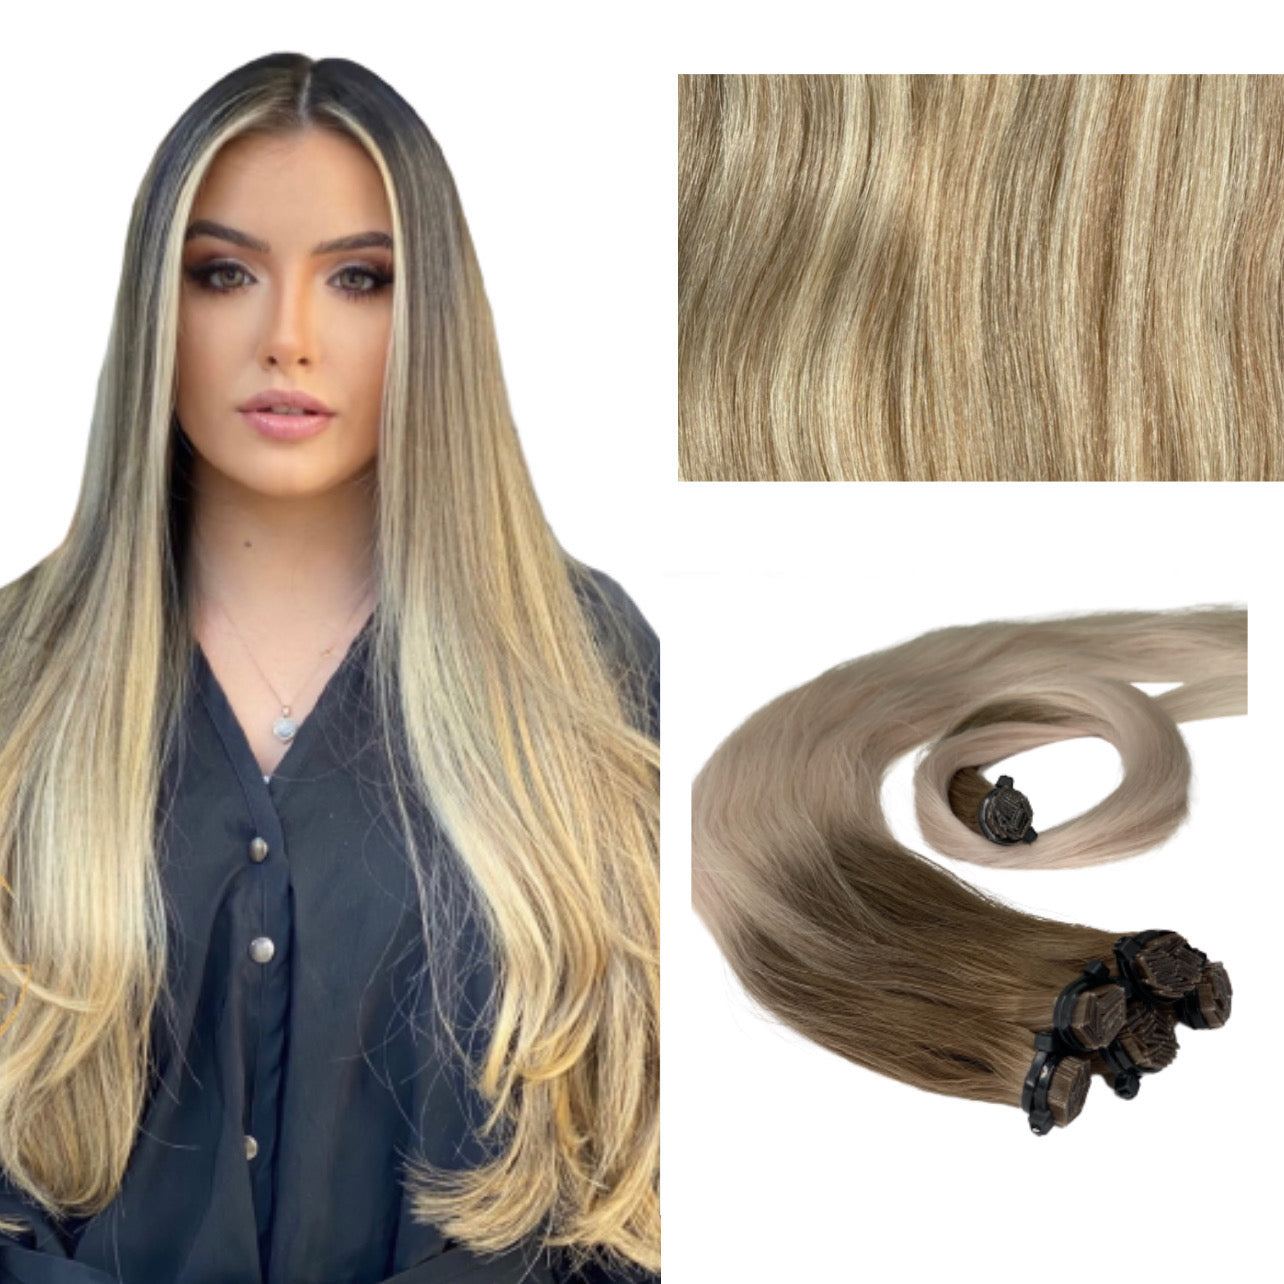 undefined Buy Microlink tools hair extensions Slavic hair of luxury quality